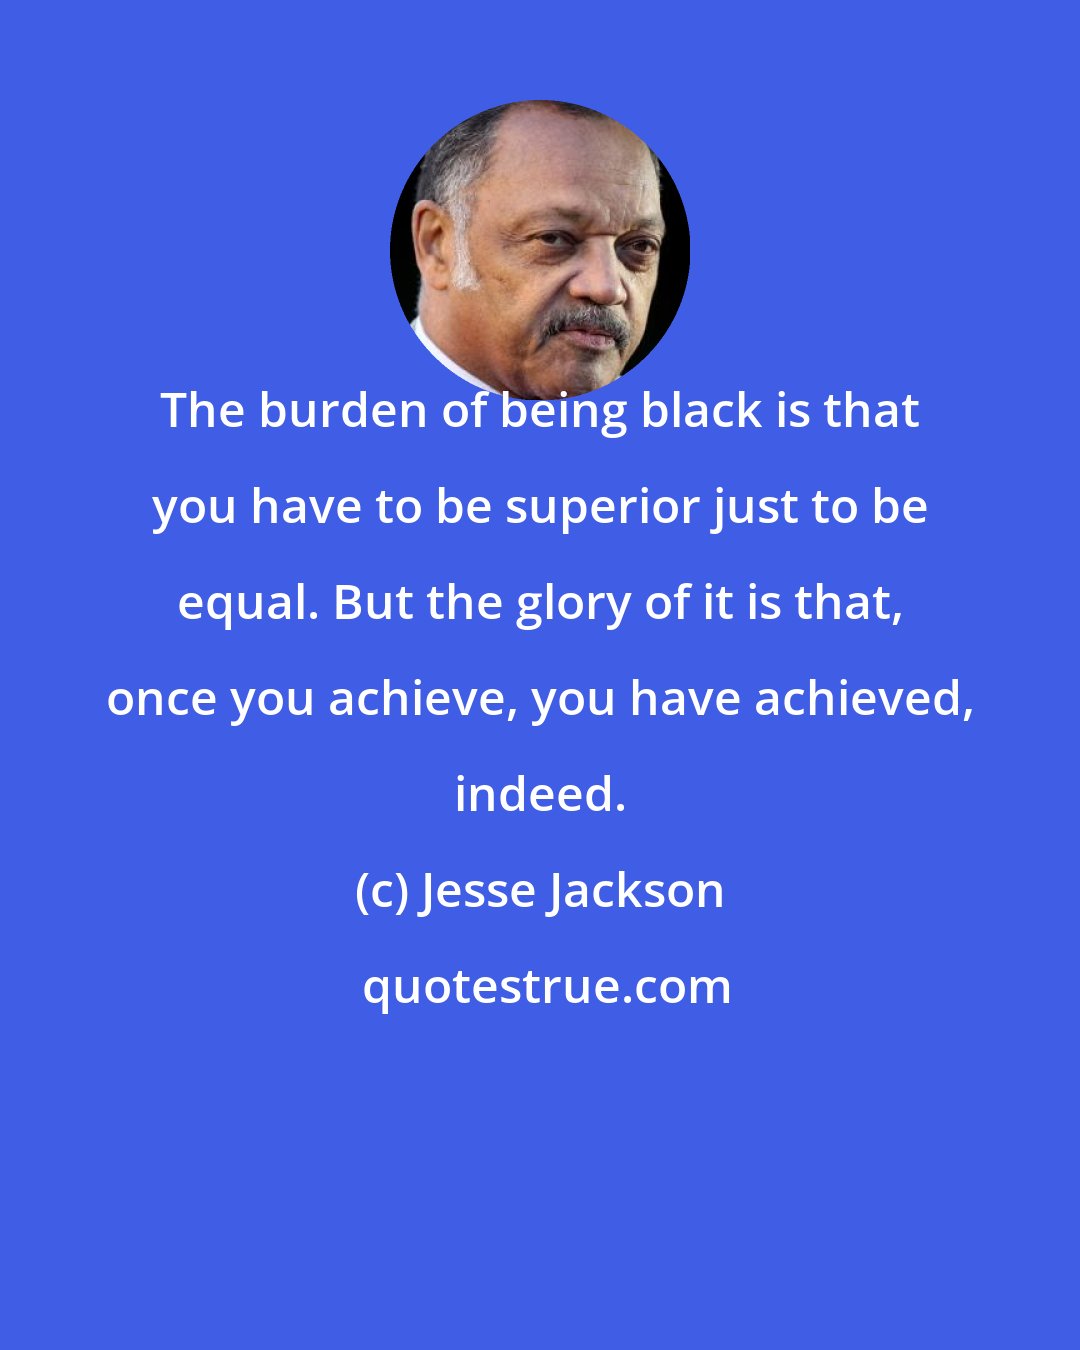 Jesse Jackson: The burden of being black is that you have to be superior just to be equal. But the glory of it is that, once you achieve, you have achieved, indeed.